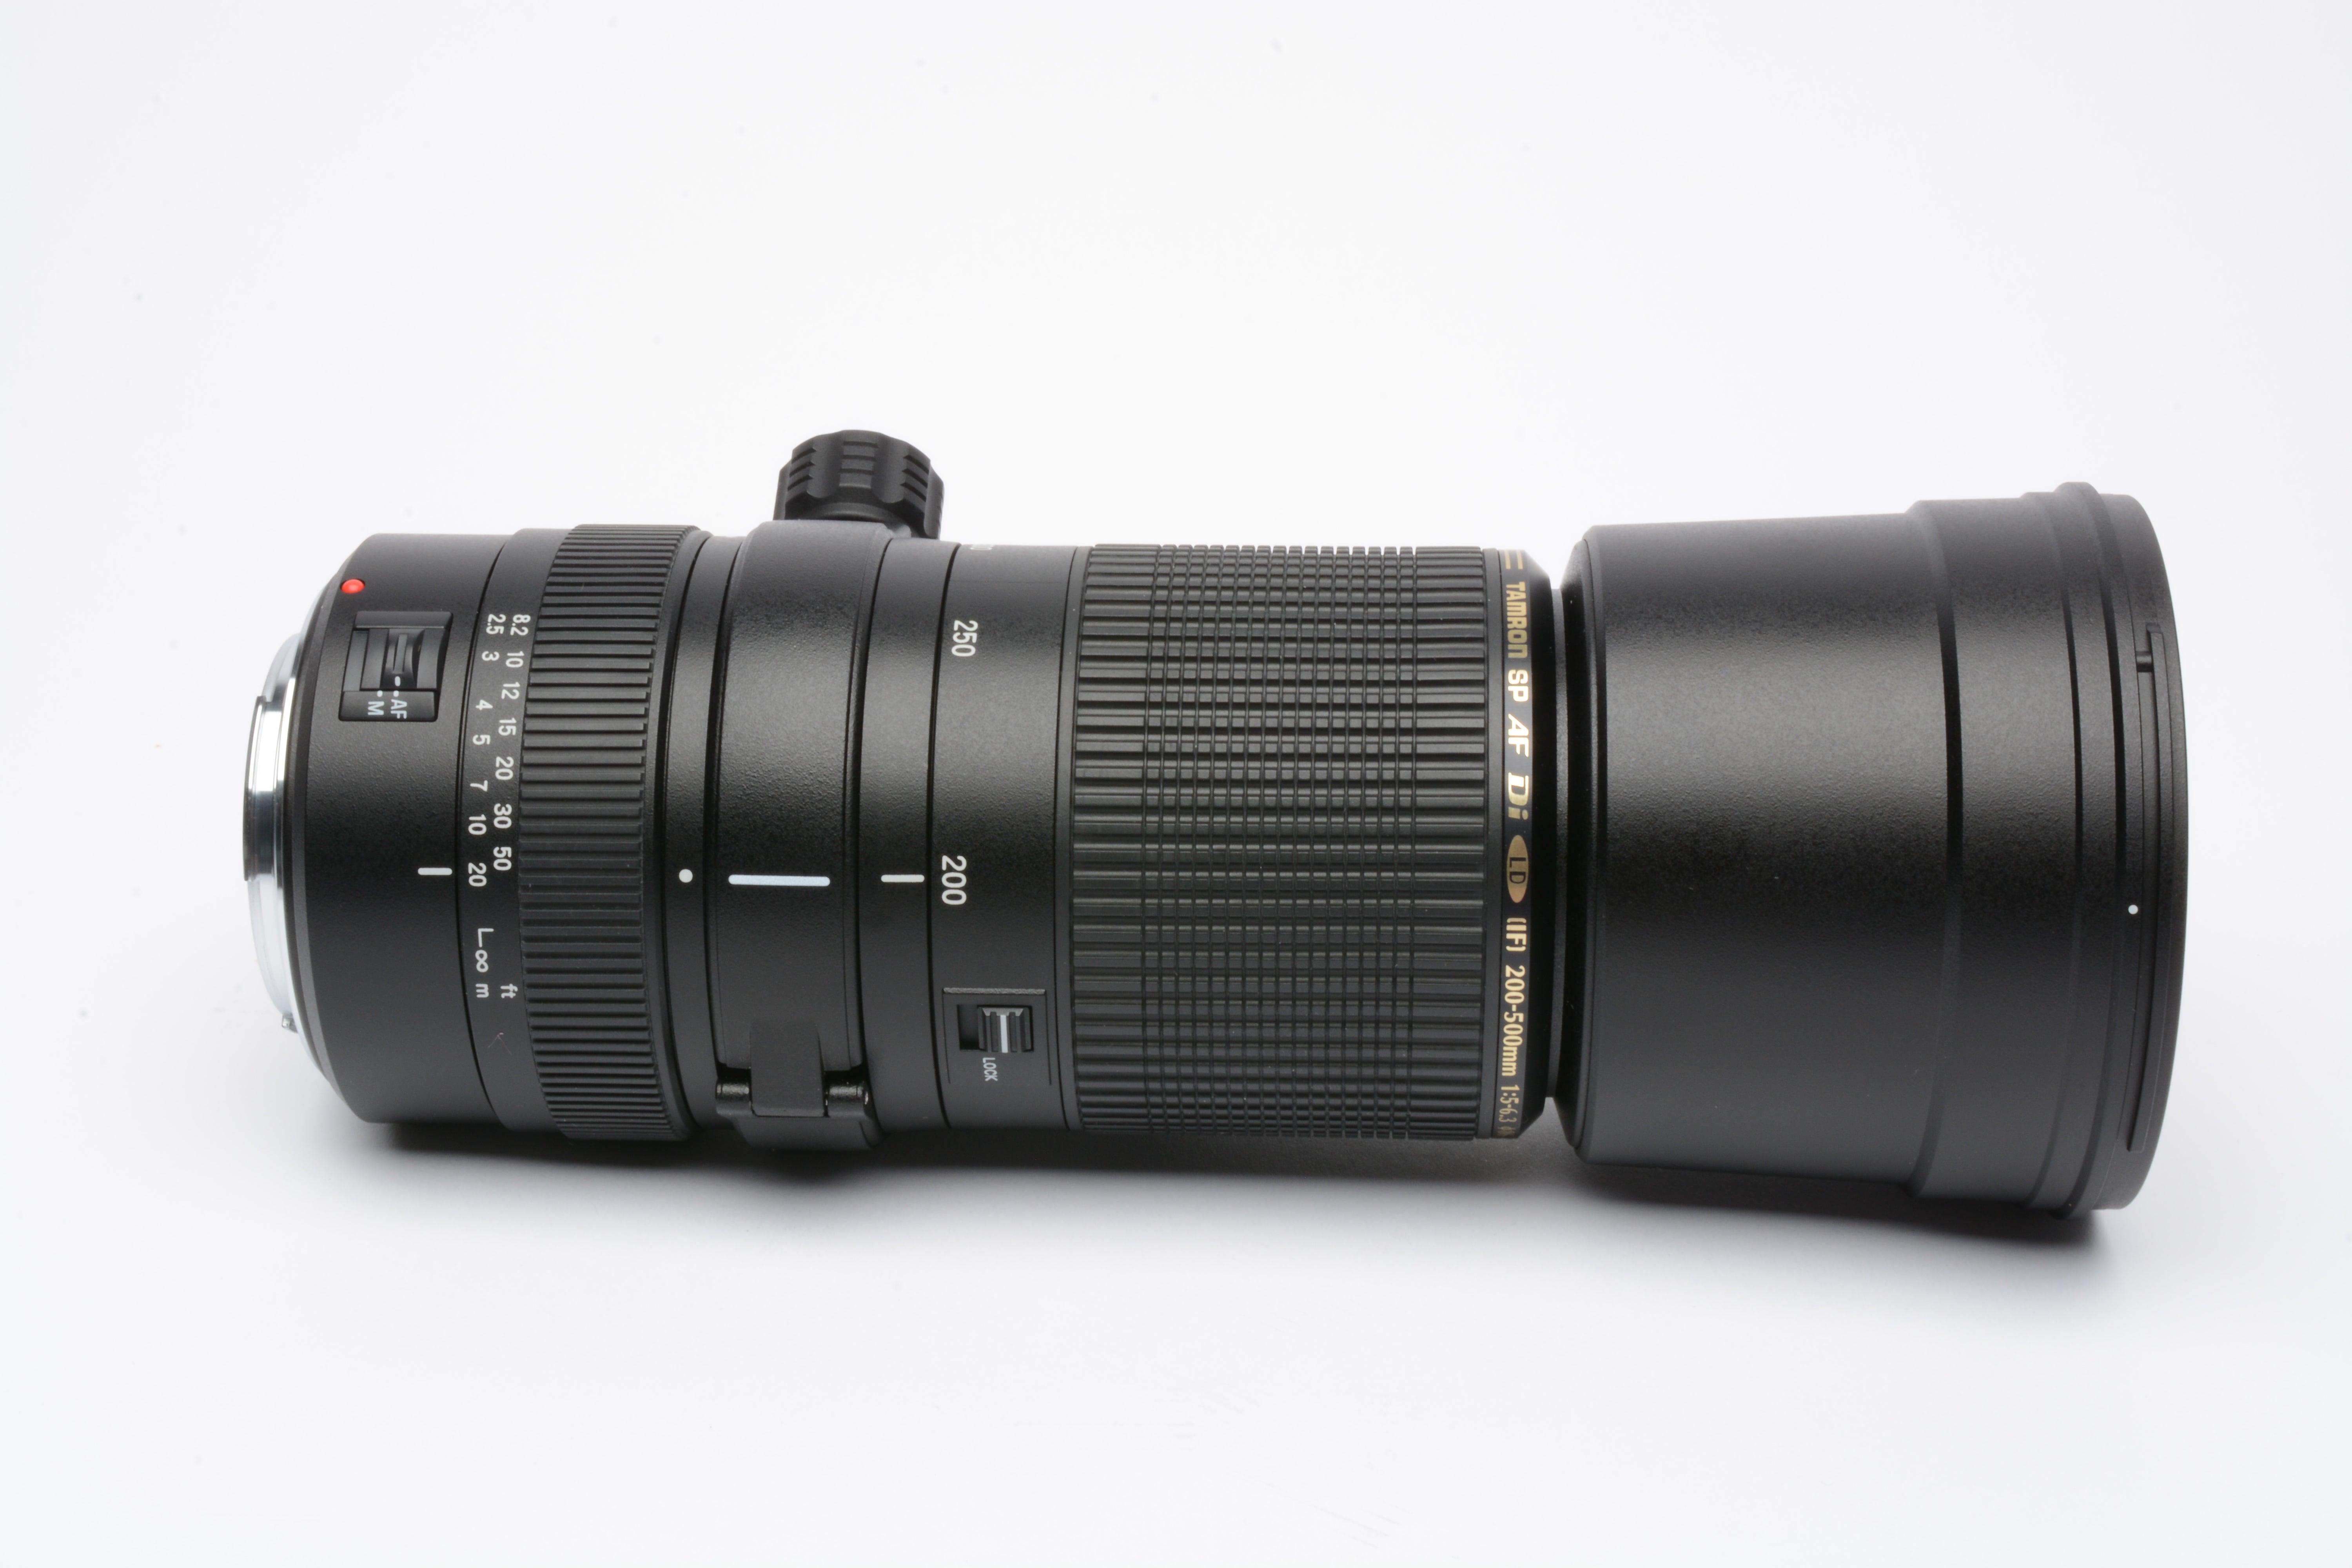 Tamron SP AF Di LC IF 200-500mm f5-6.3 A08 zoom lens for Canon 